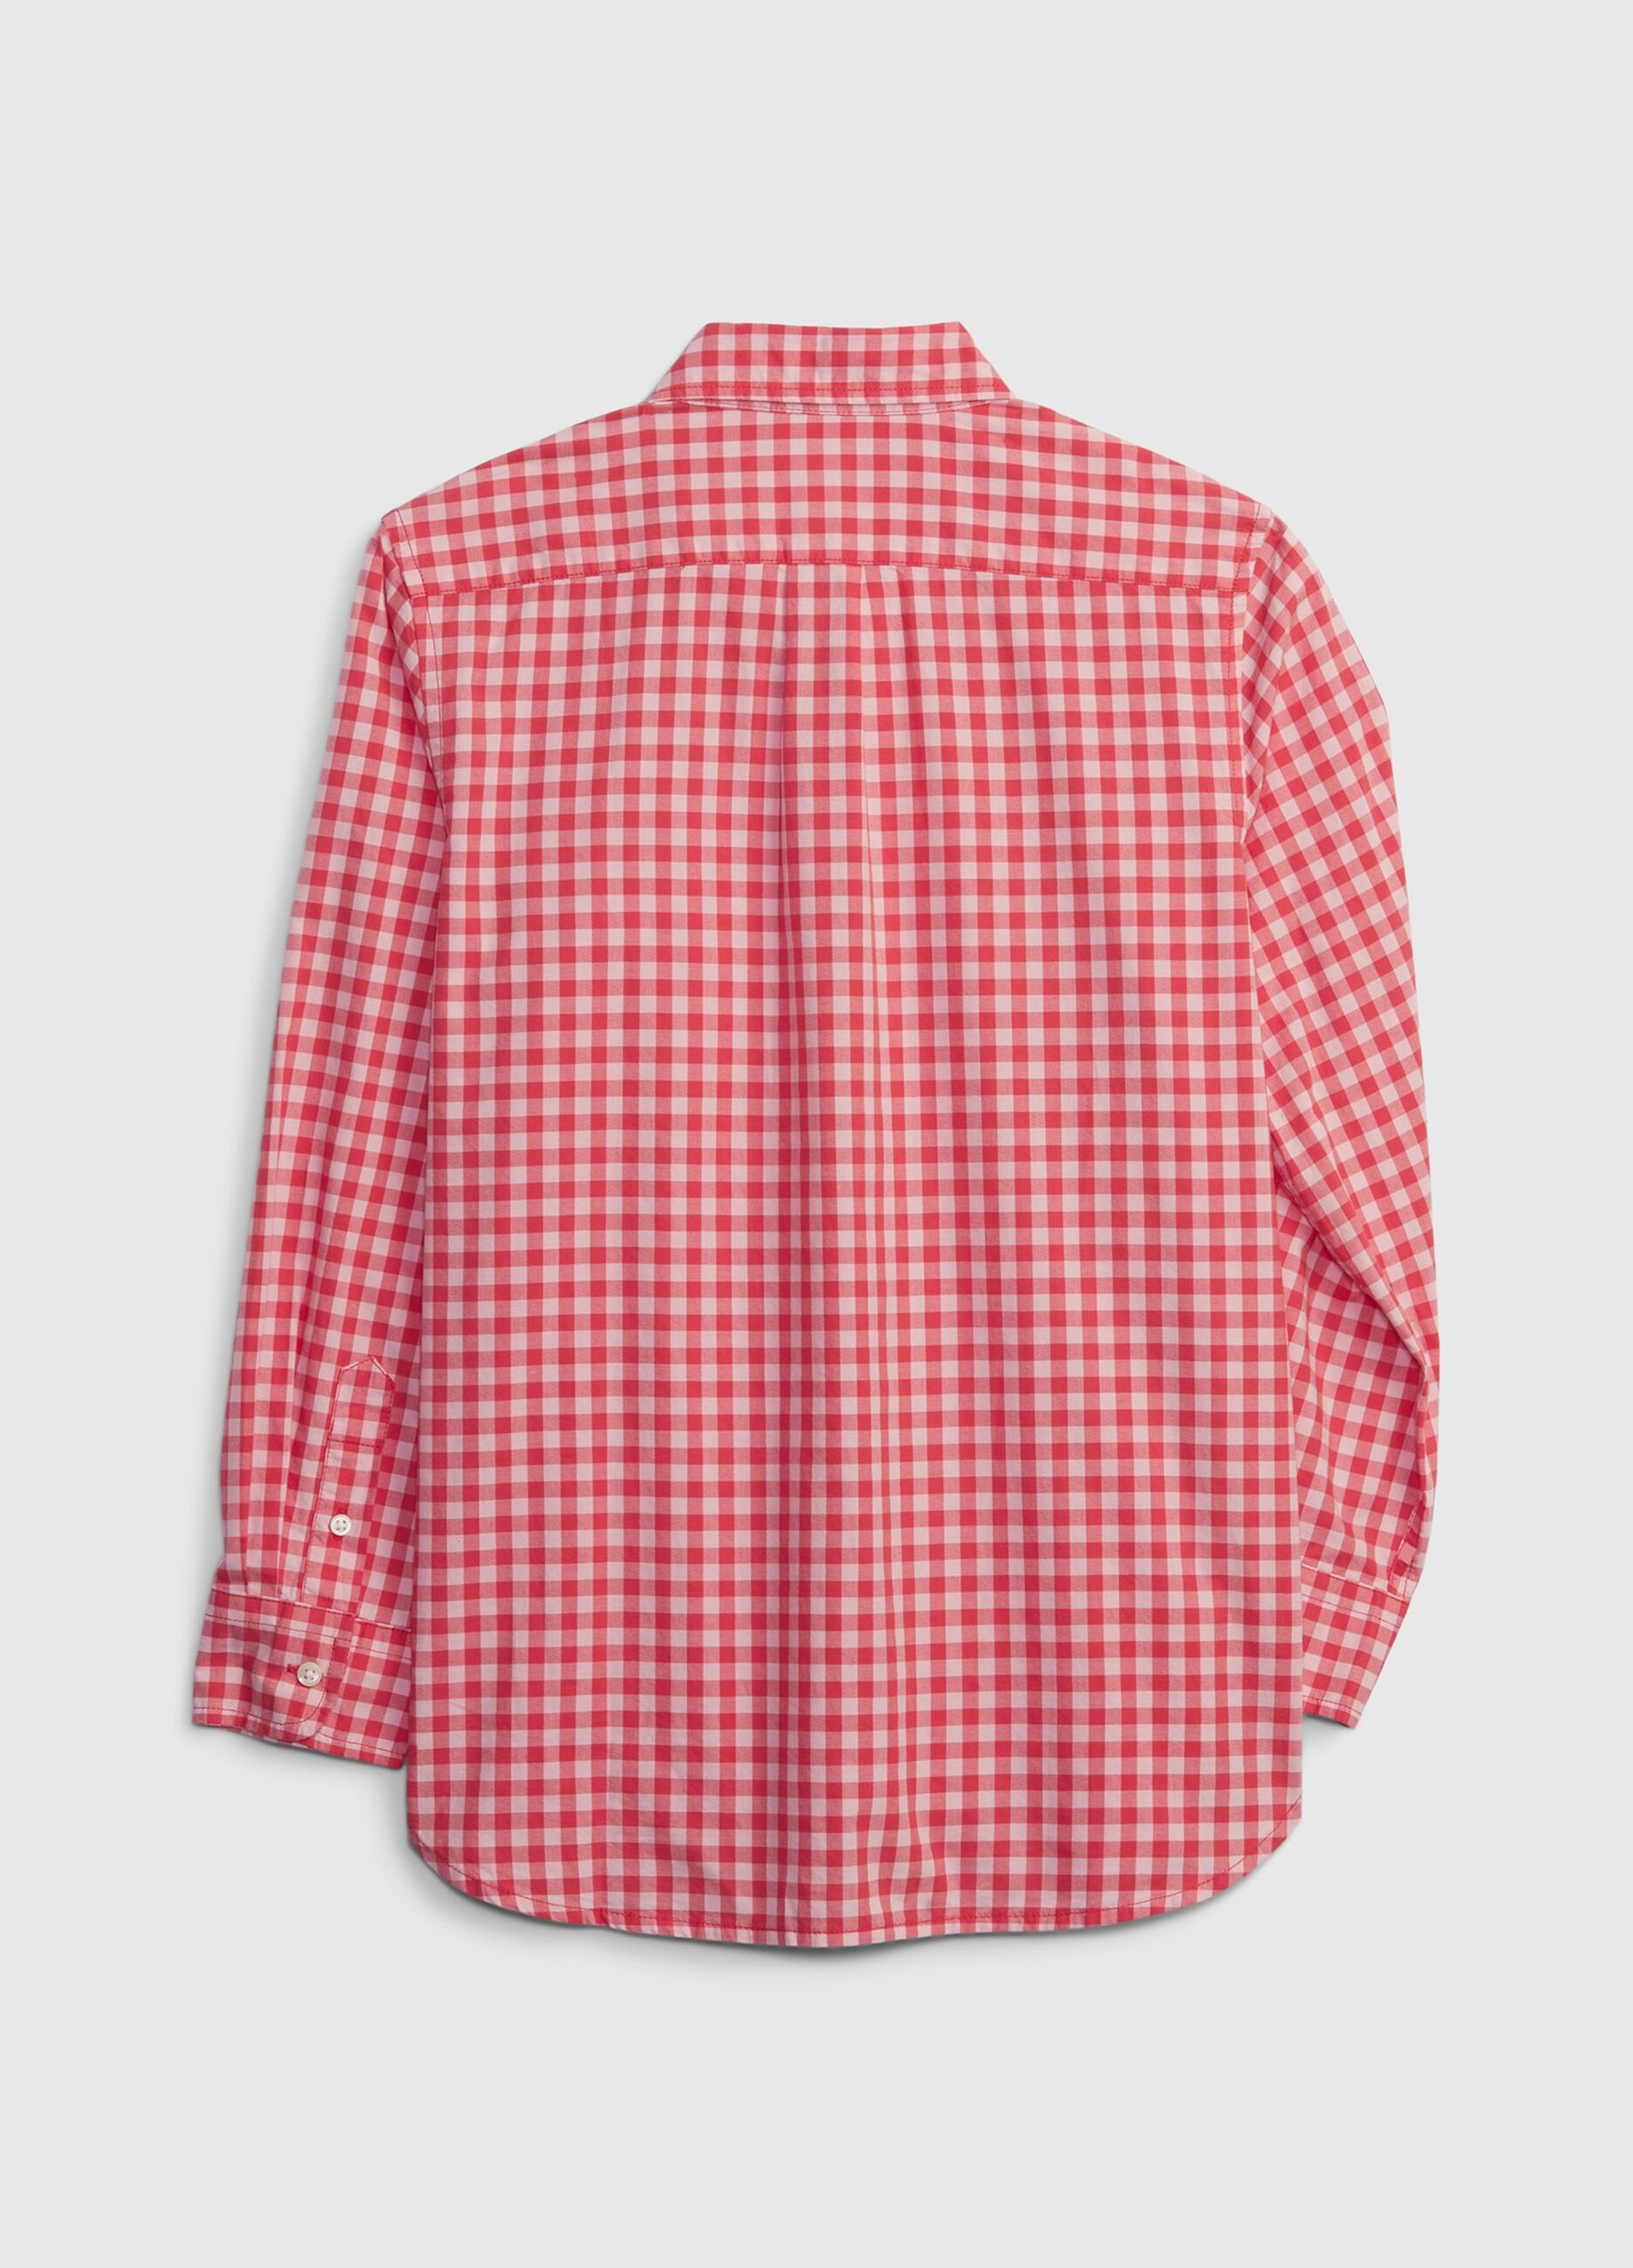 Cotton shirt with gingham pattern